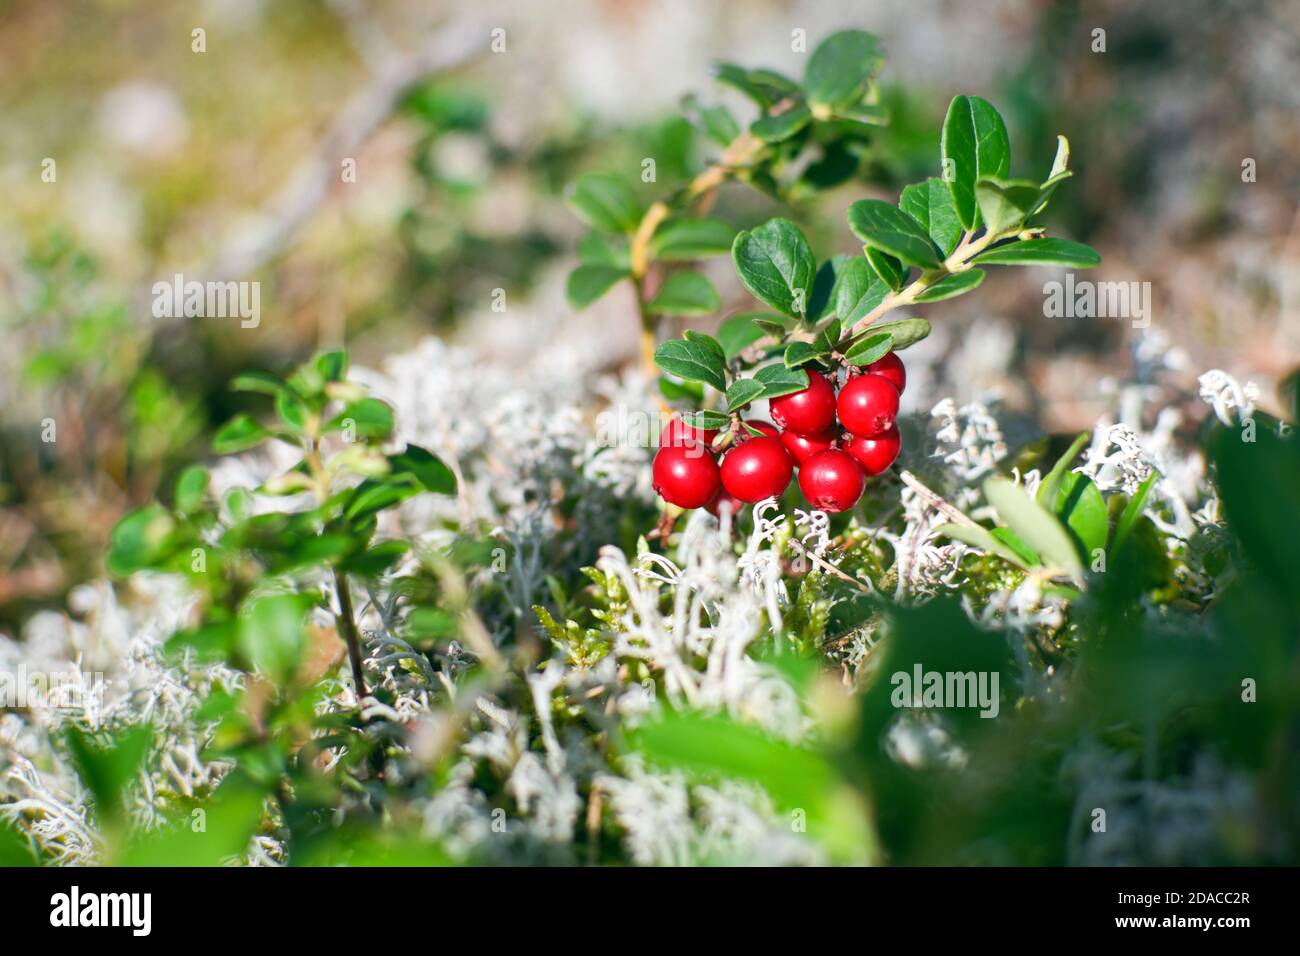 Lingonberry also partridgeberry, mountain cranberry or cowberry (lat. Vaccinium vitis-idaea) shrub with ripe red fruits growing in the forest Stock Photo